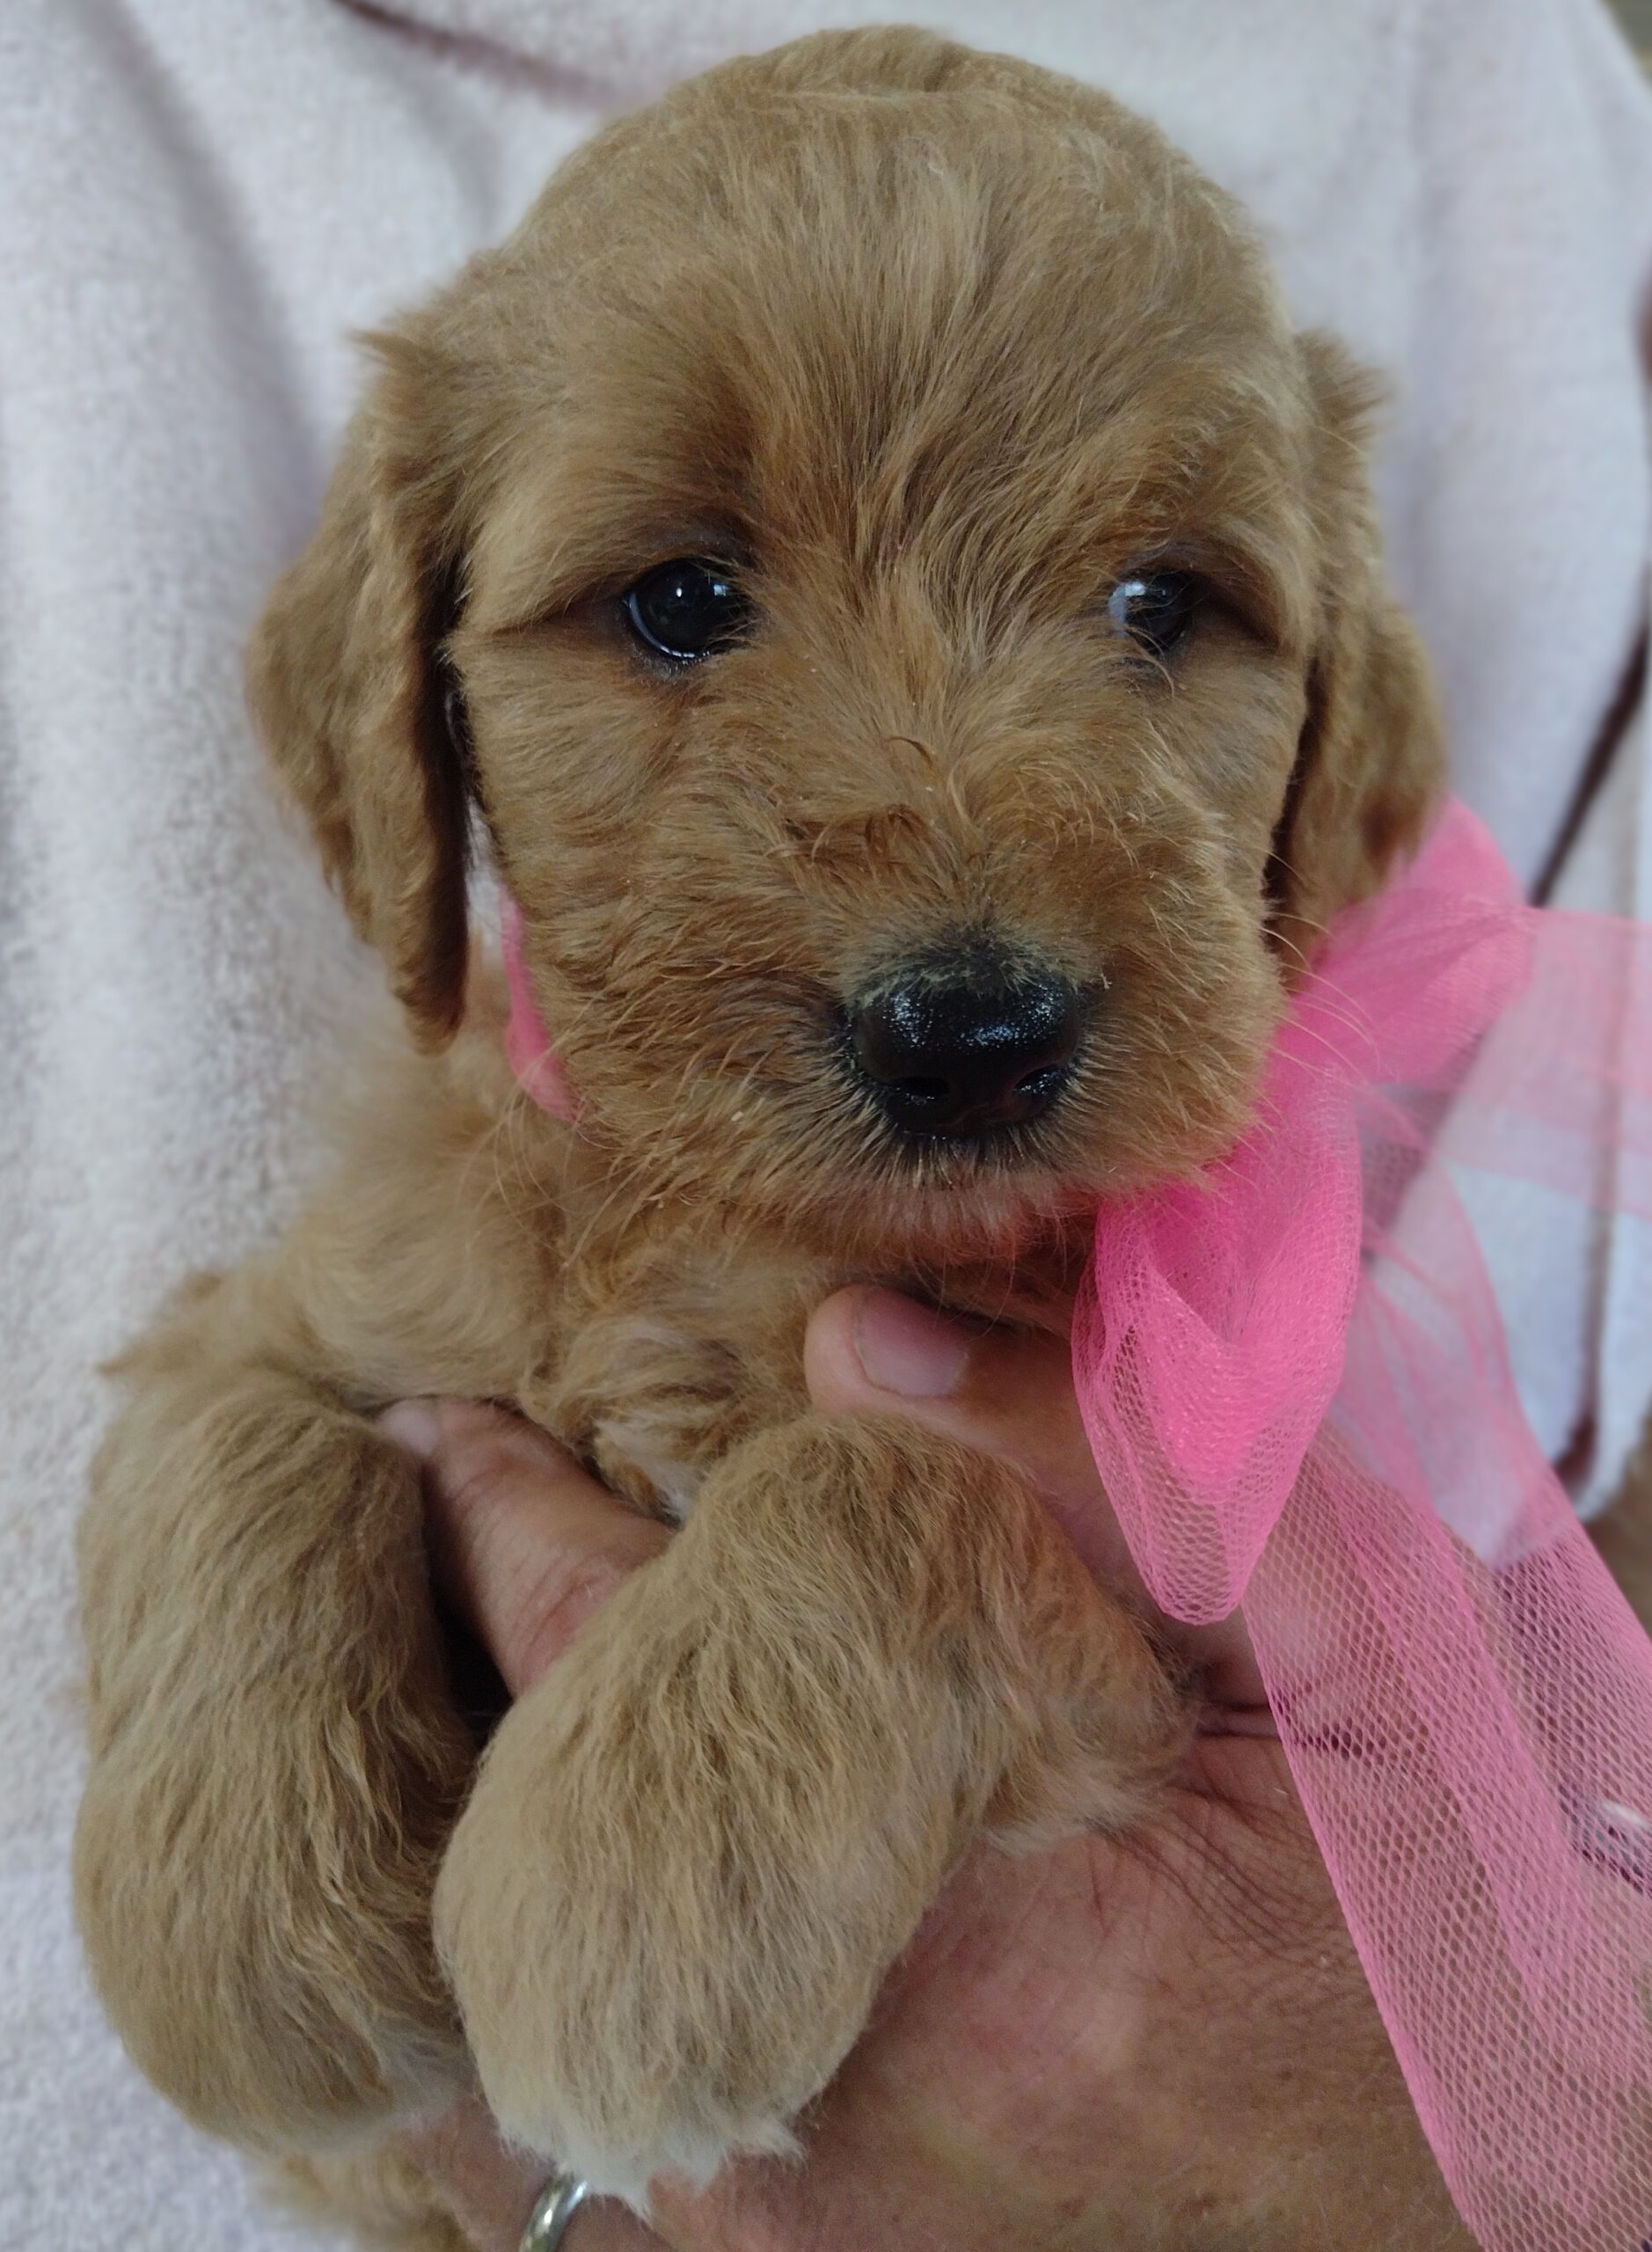 CONGRATULATIONS Kyle And Jessi From Maple Grove, MN On Your New Puppy From Red Cedar Farms Goldendoodles In Hutchinson, MN!!